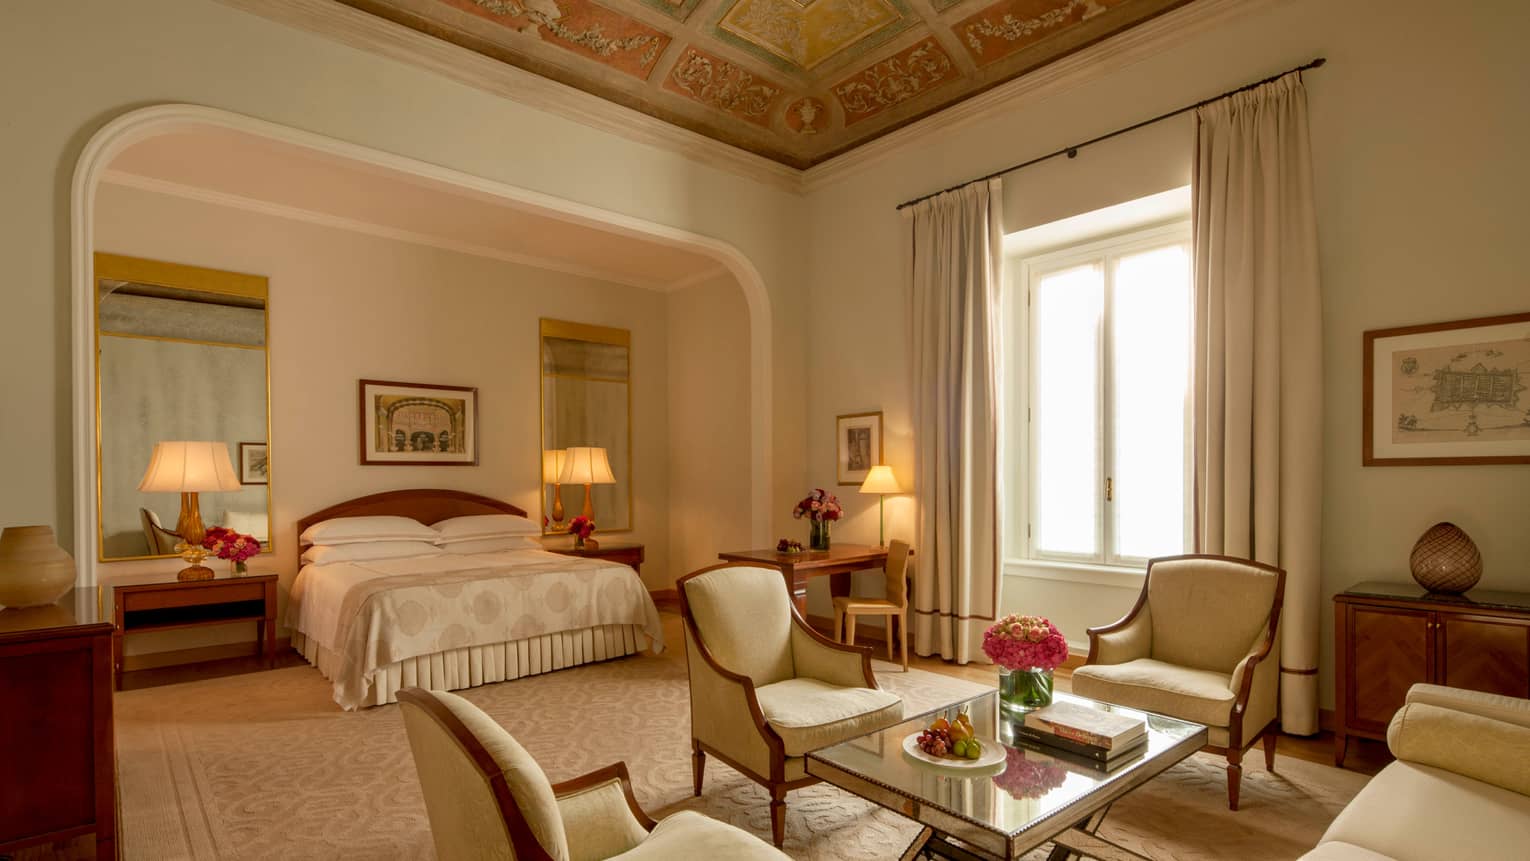 Fresco Suite soaring ceilings, bed in alcove with mirrors, antique-style ivory armchairs around table